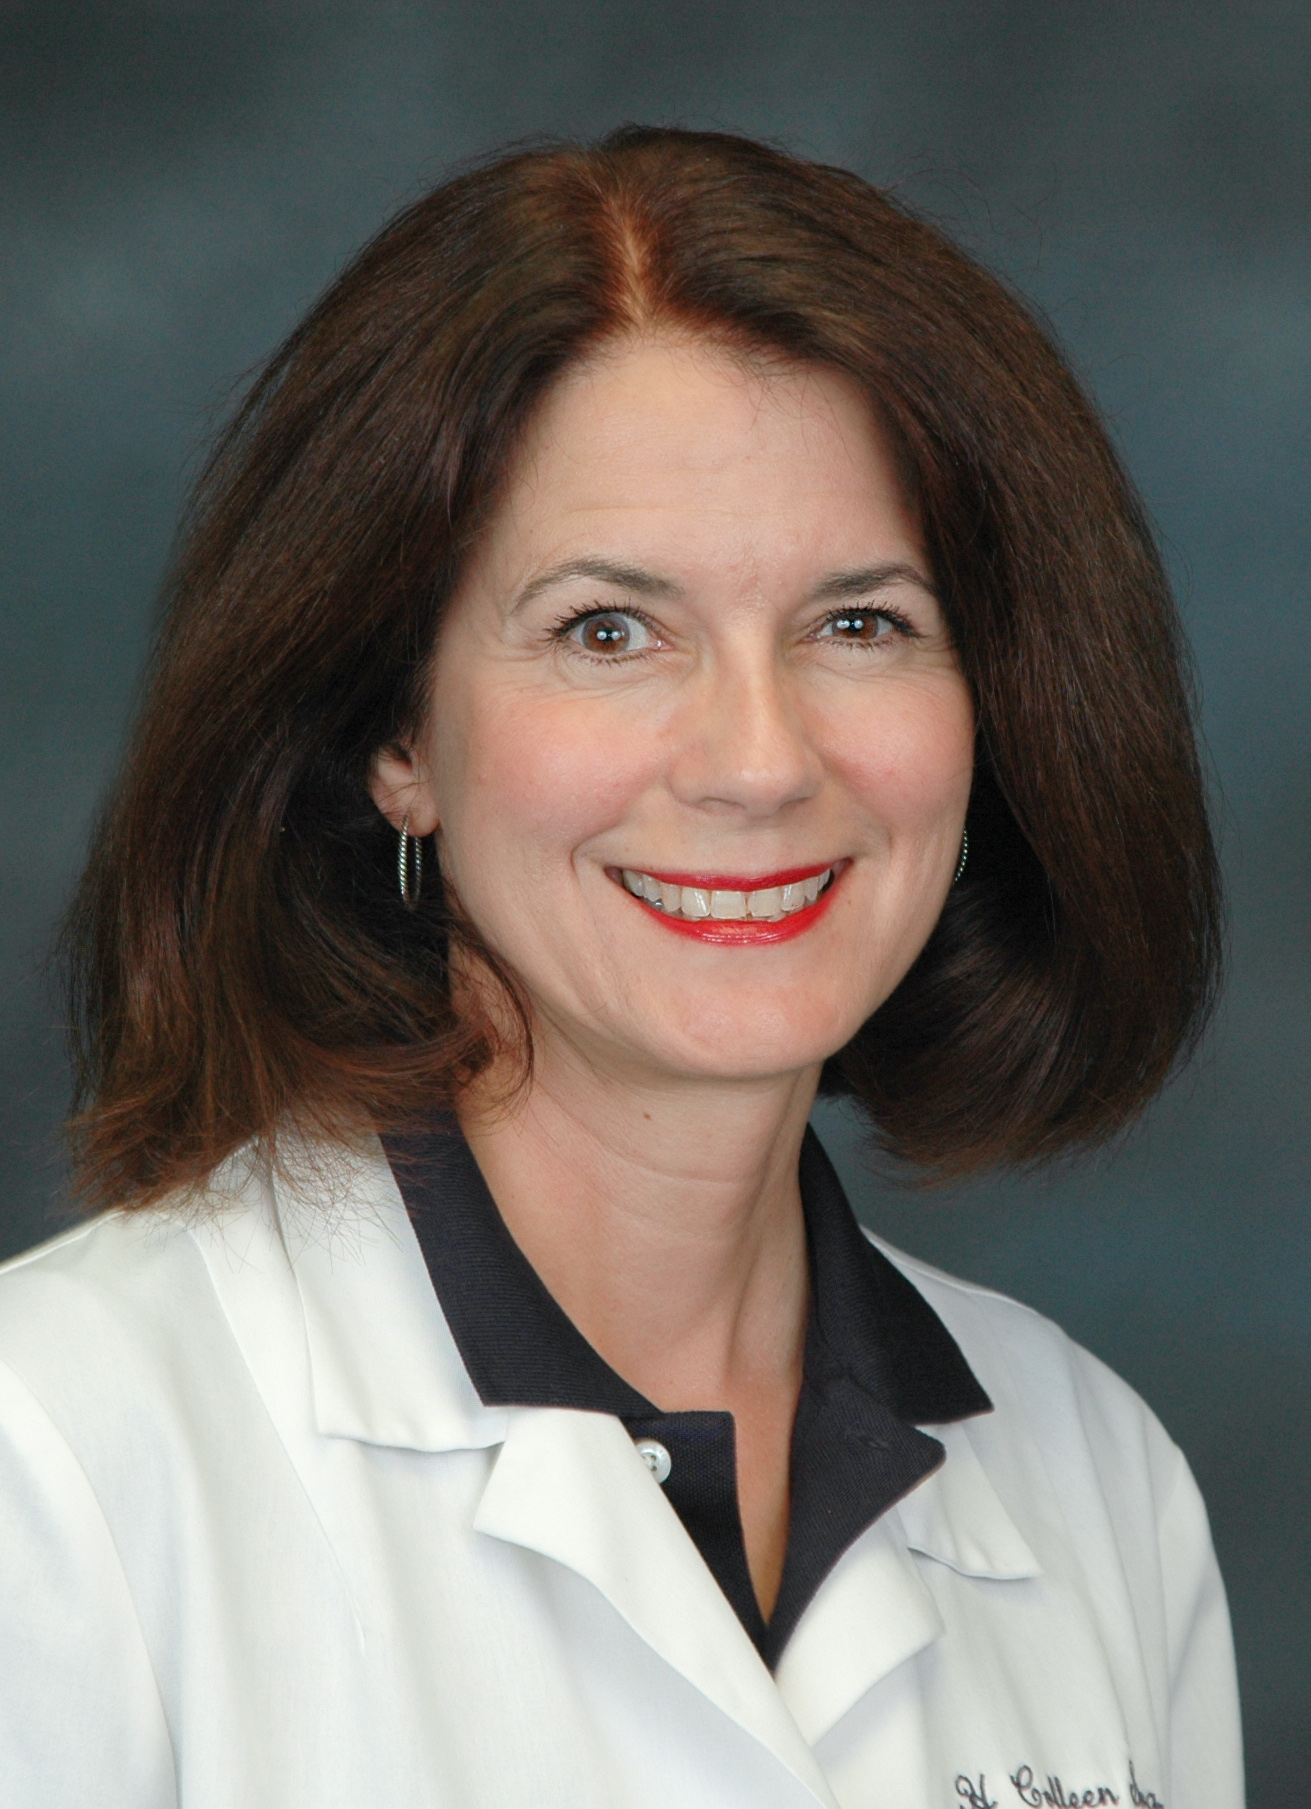 headshot image of surgical oncologist Dr. Colleen Silva. She is a brunette with chin-length hair and is wearing her white coat and smiling